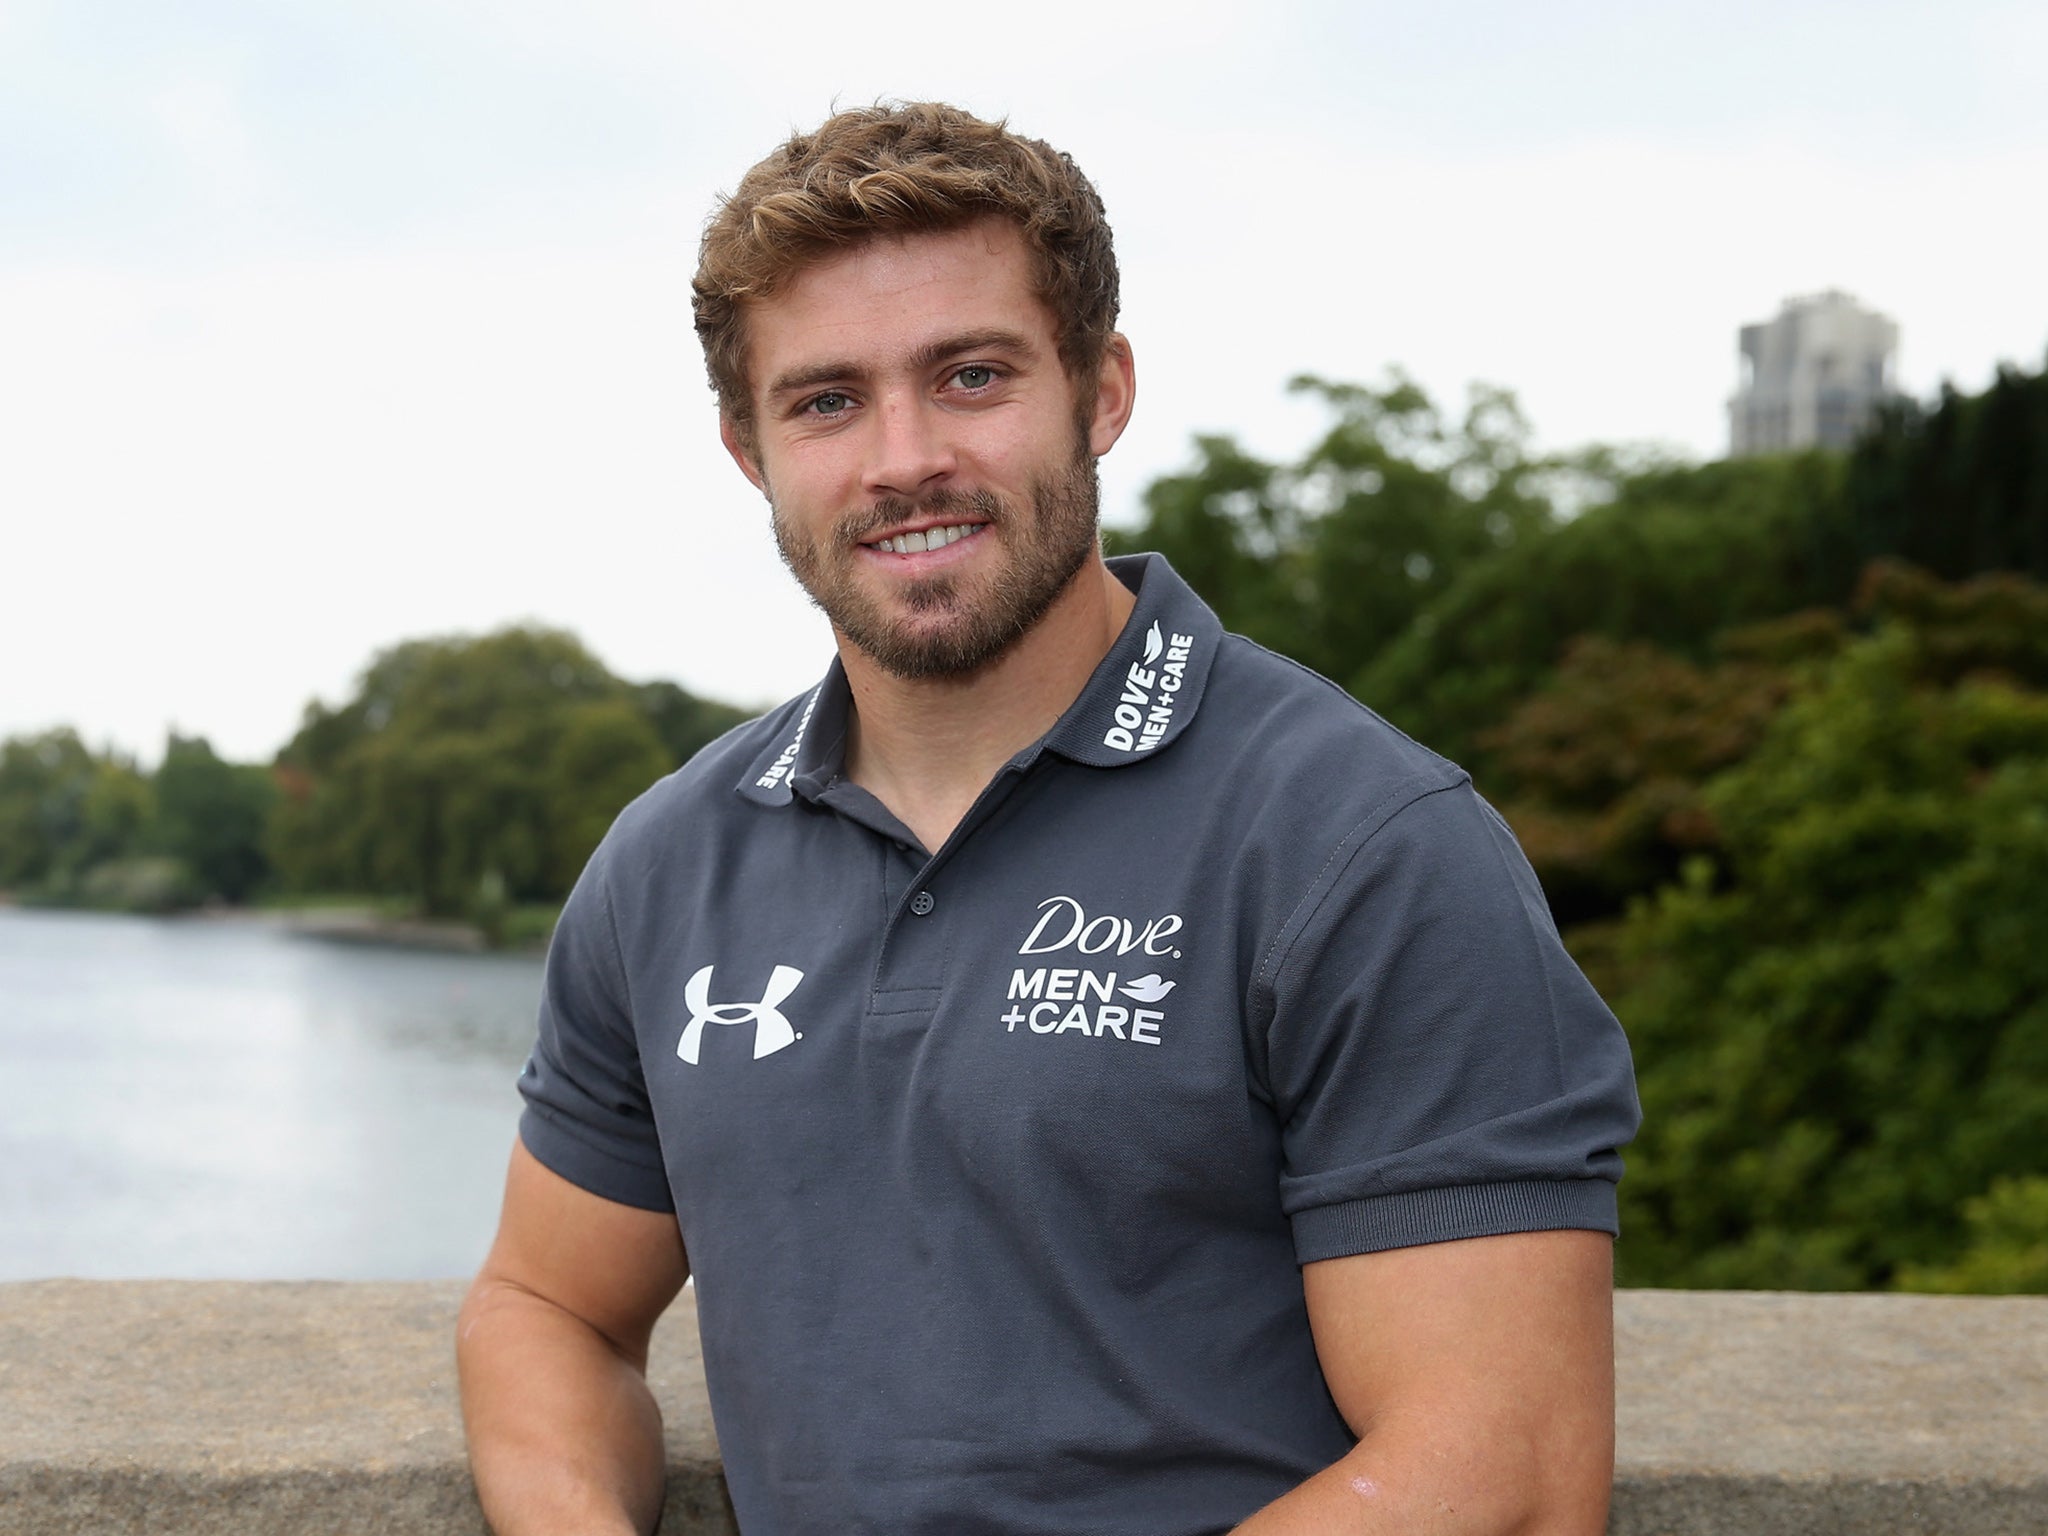 Wales’ Leigh Halfpenny is still recovering from a knee injury he suffered prior to the World Cup